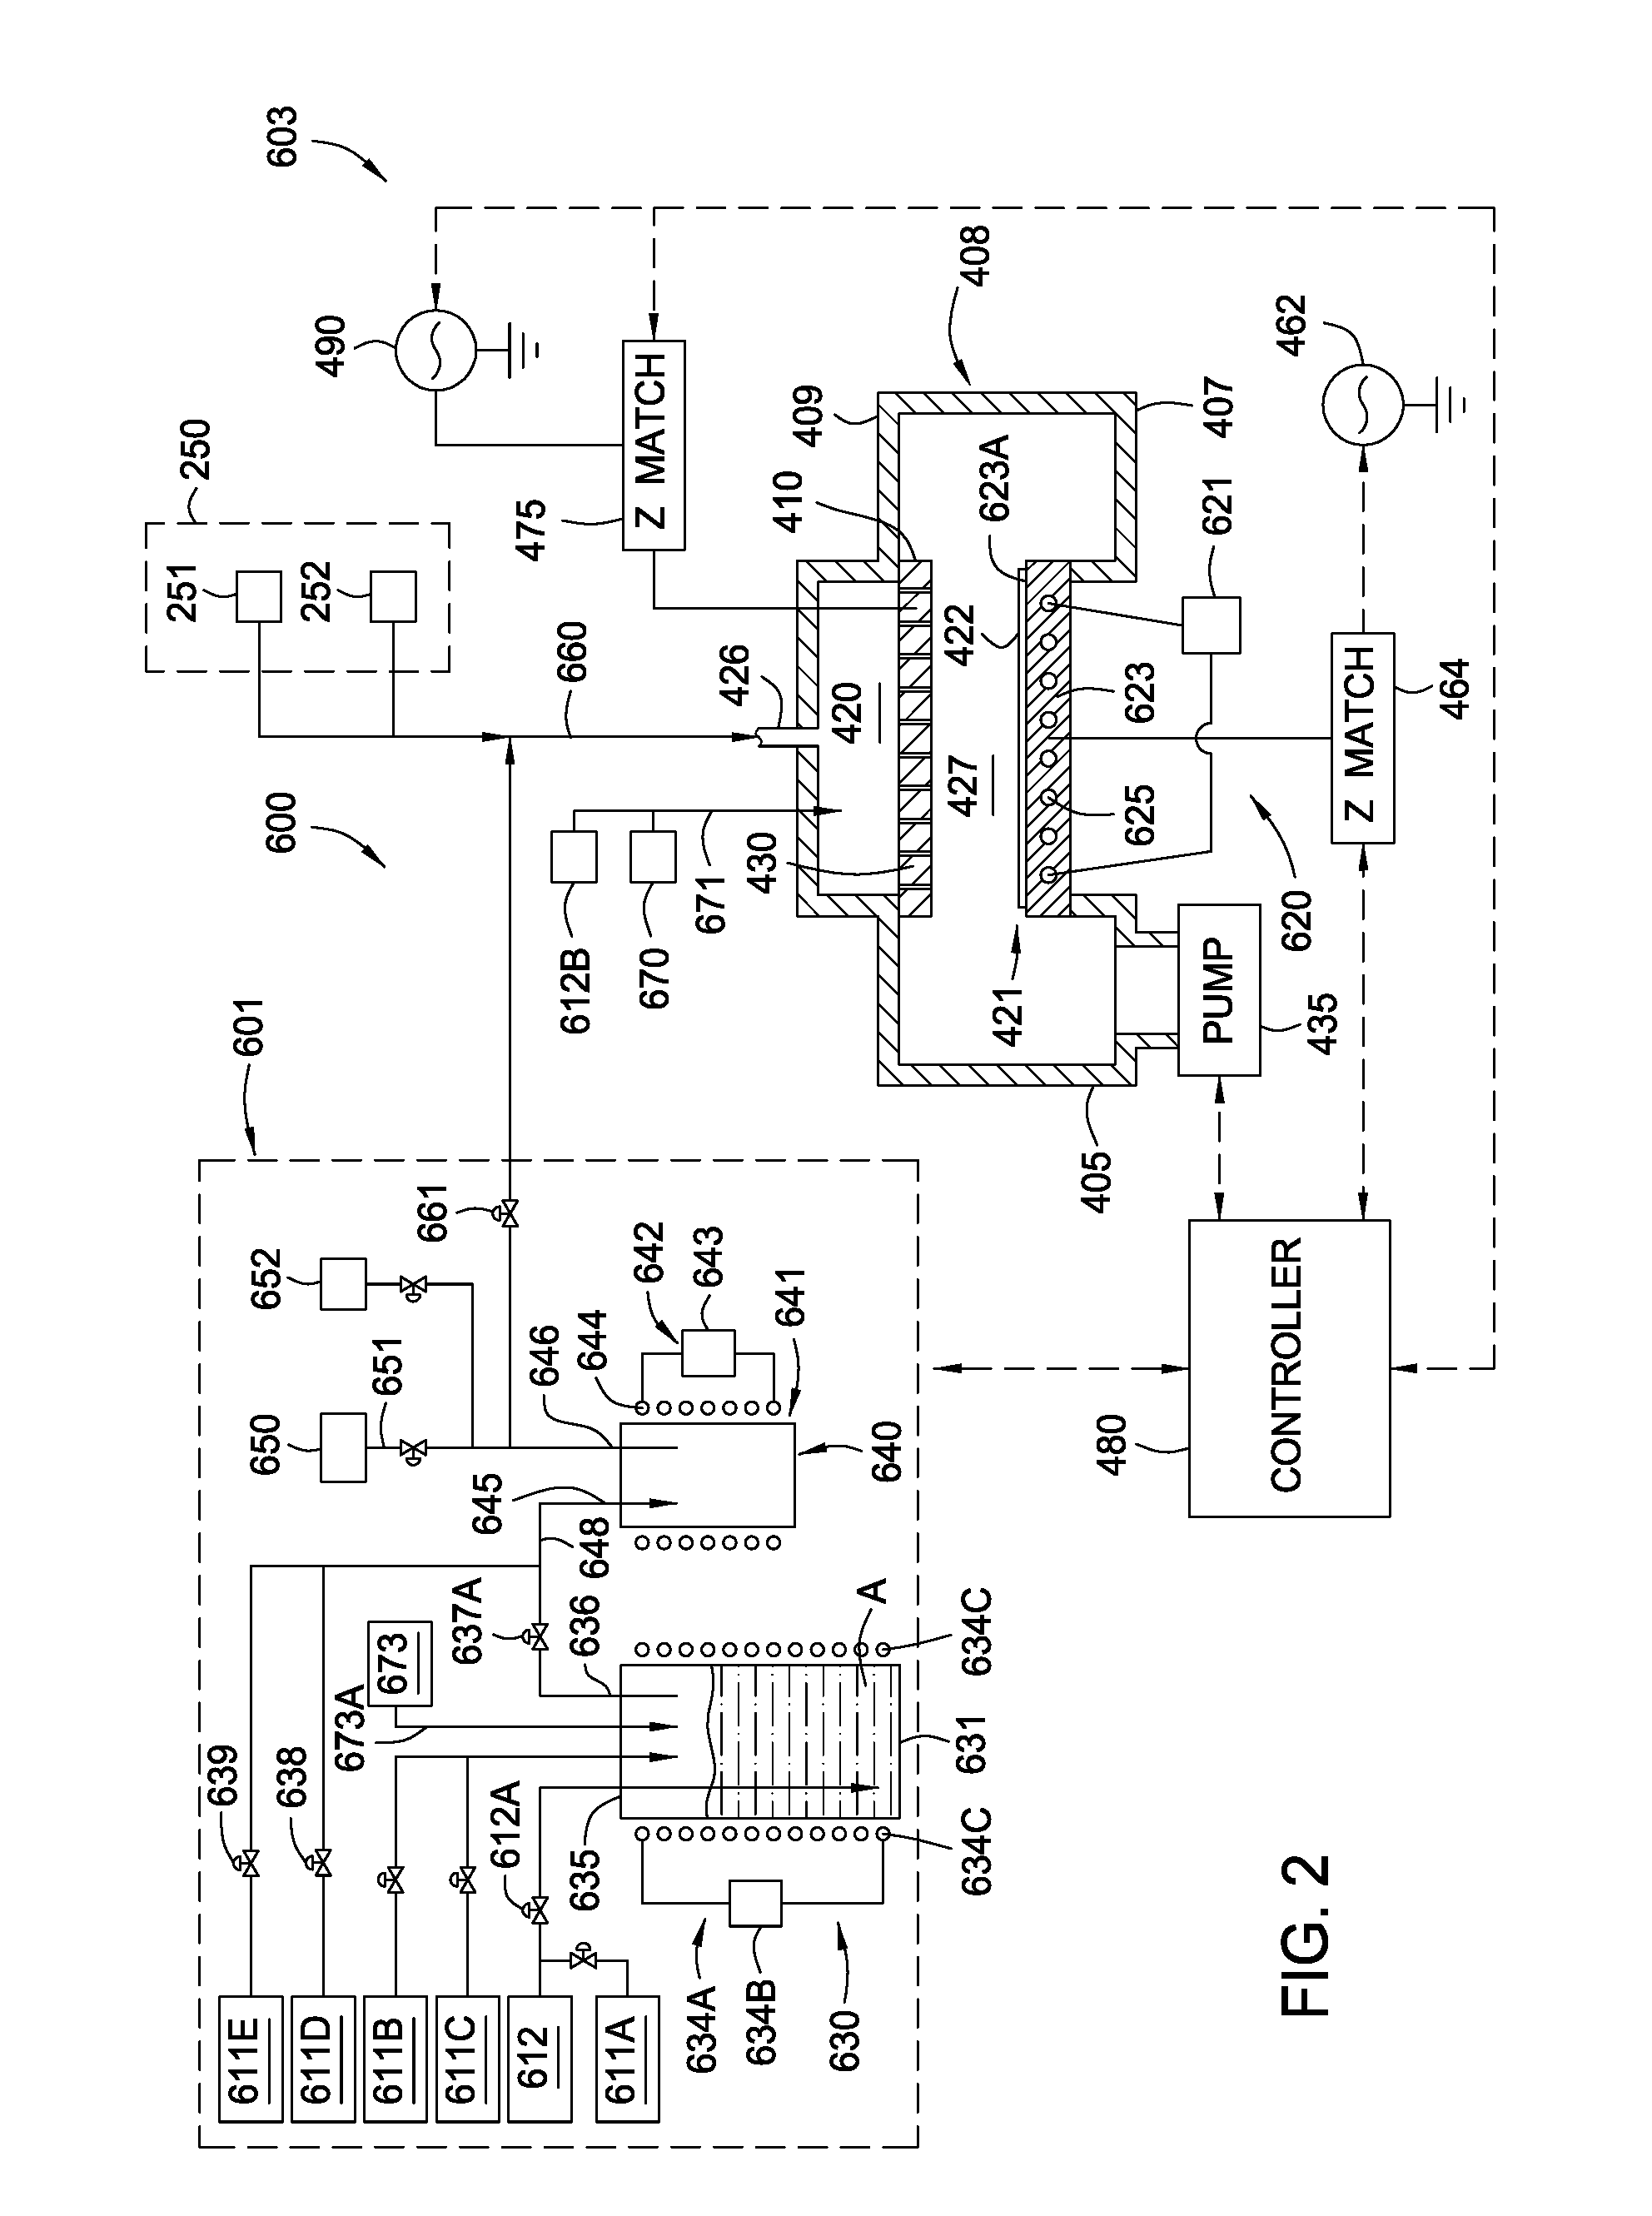 Method of forming a reliable electrochemical capacitor